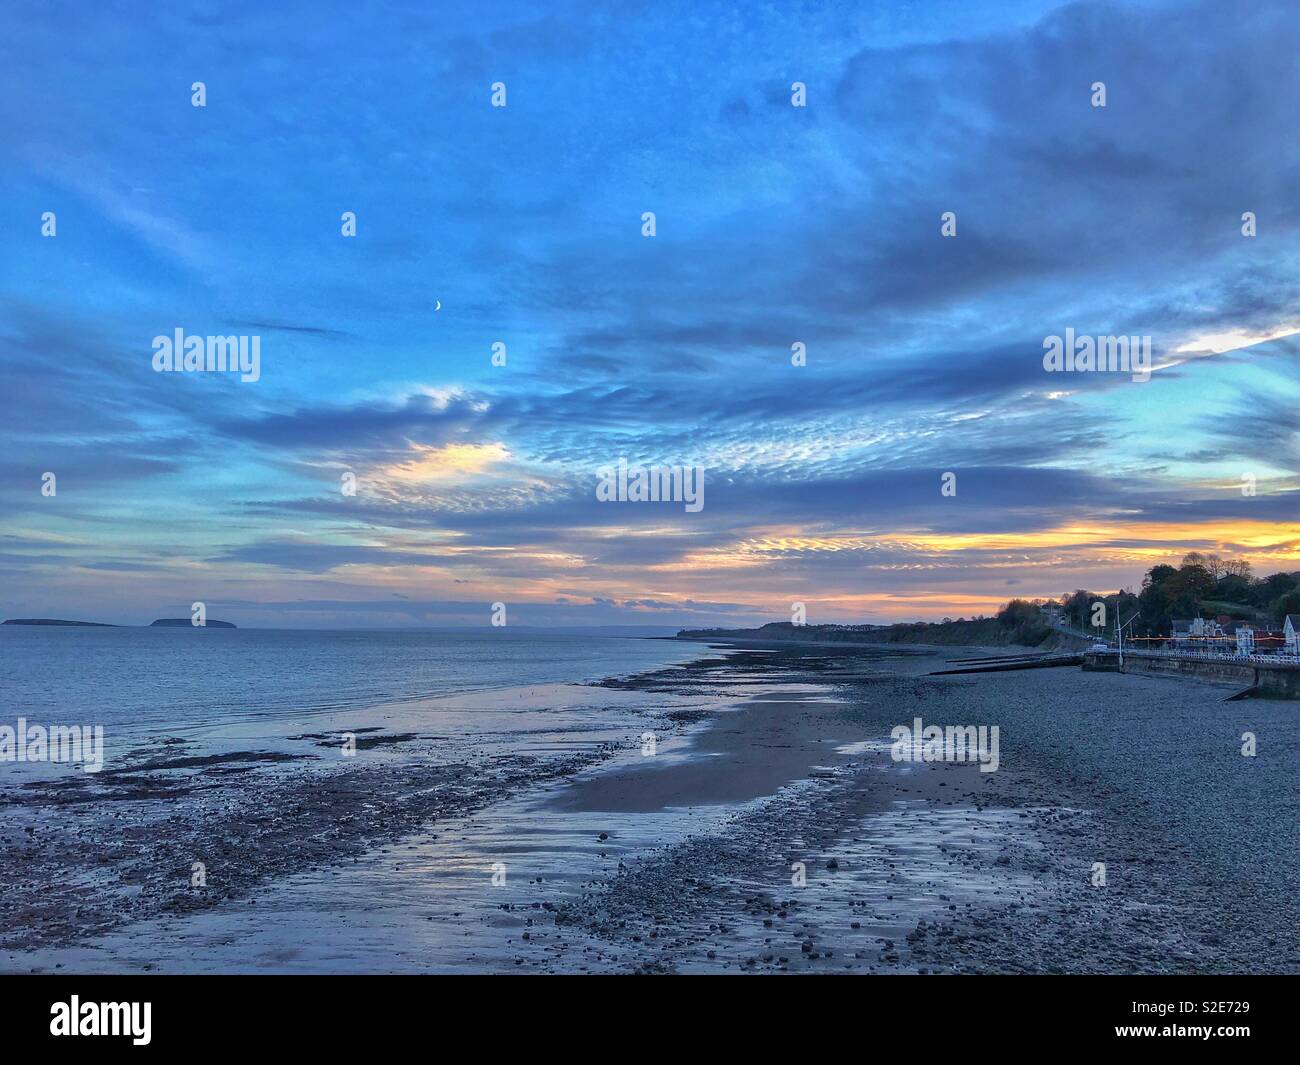 Penarth beach at dusk under a crescent moon, with Flatholm and Steepholm islands in the distance, November. Stock Photo